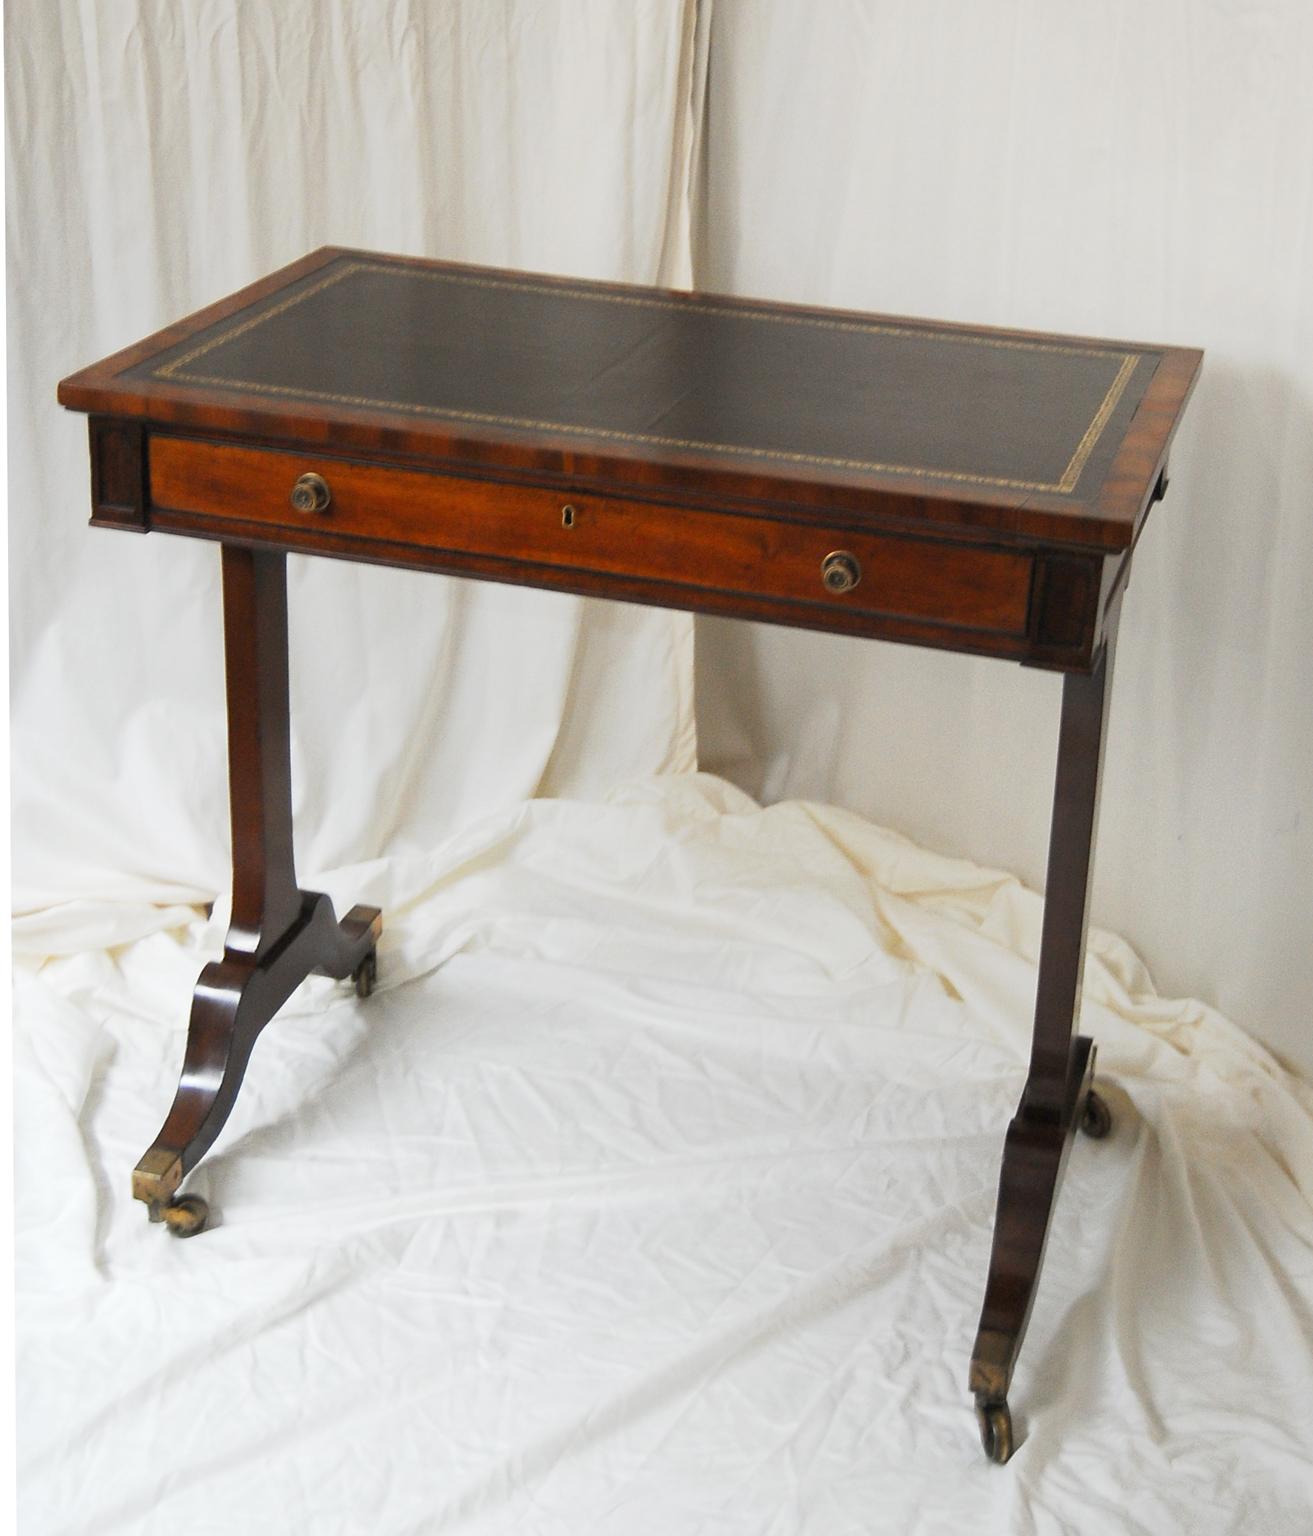 English Regency period mahogany one drawer pedestal end writing table with black hand dyed and tooled leather writing surface. This small elegant writing table has downswept legs ending in brass toes and casters. It is finished on all four sides so